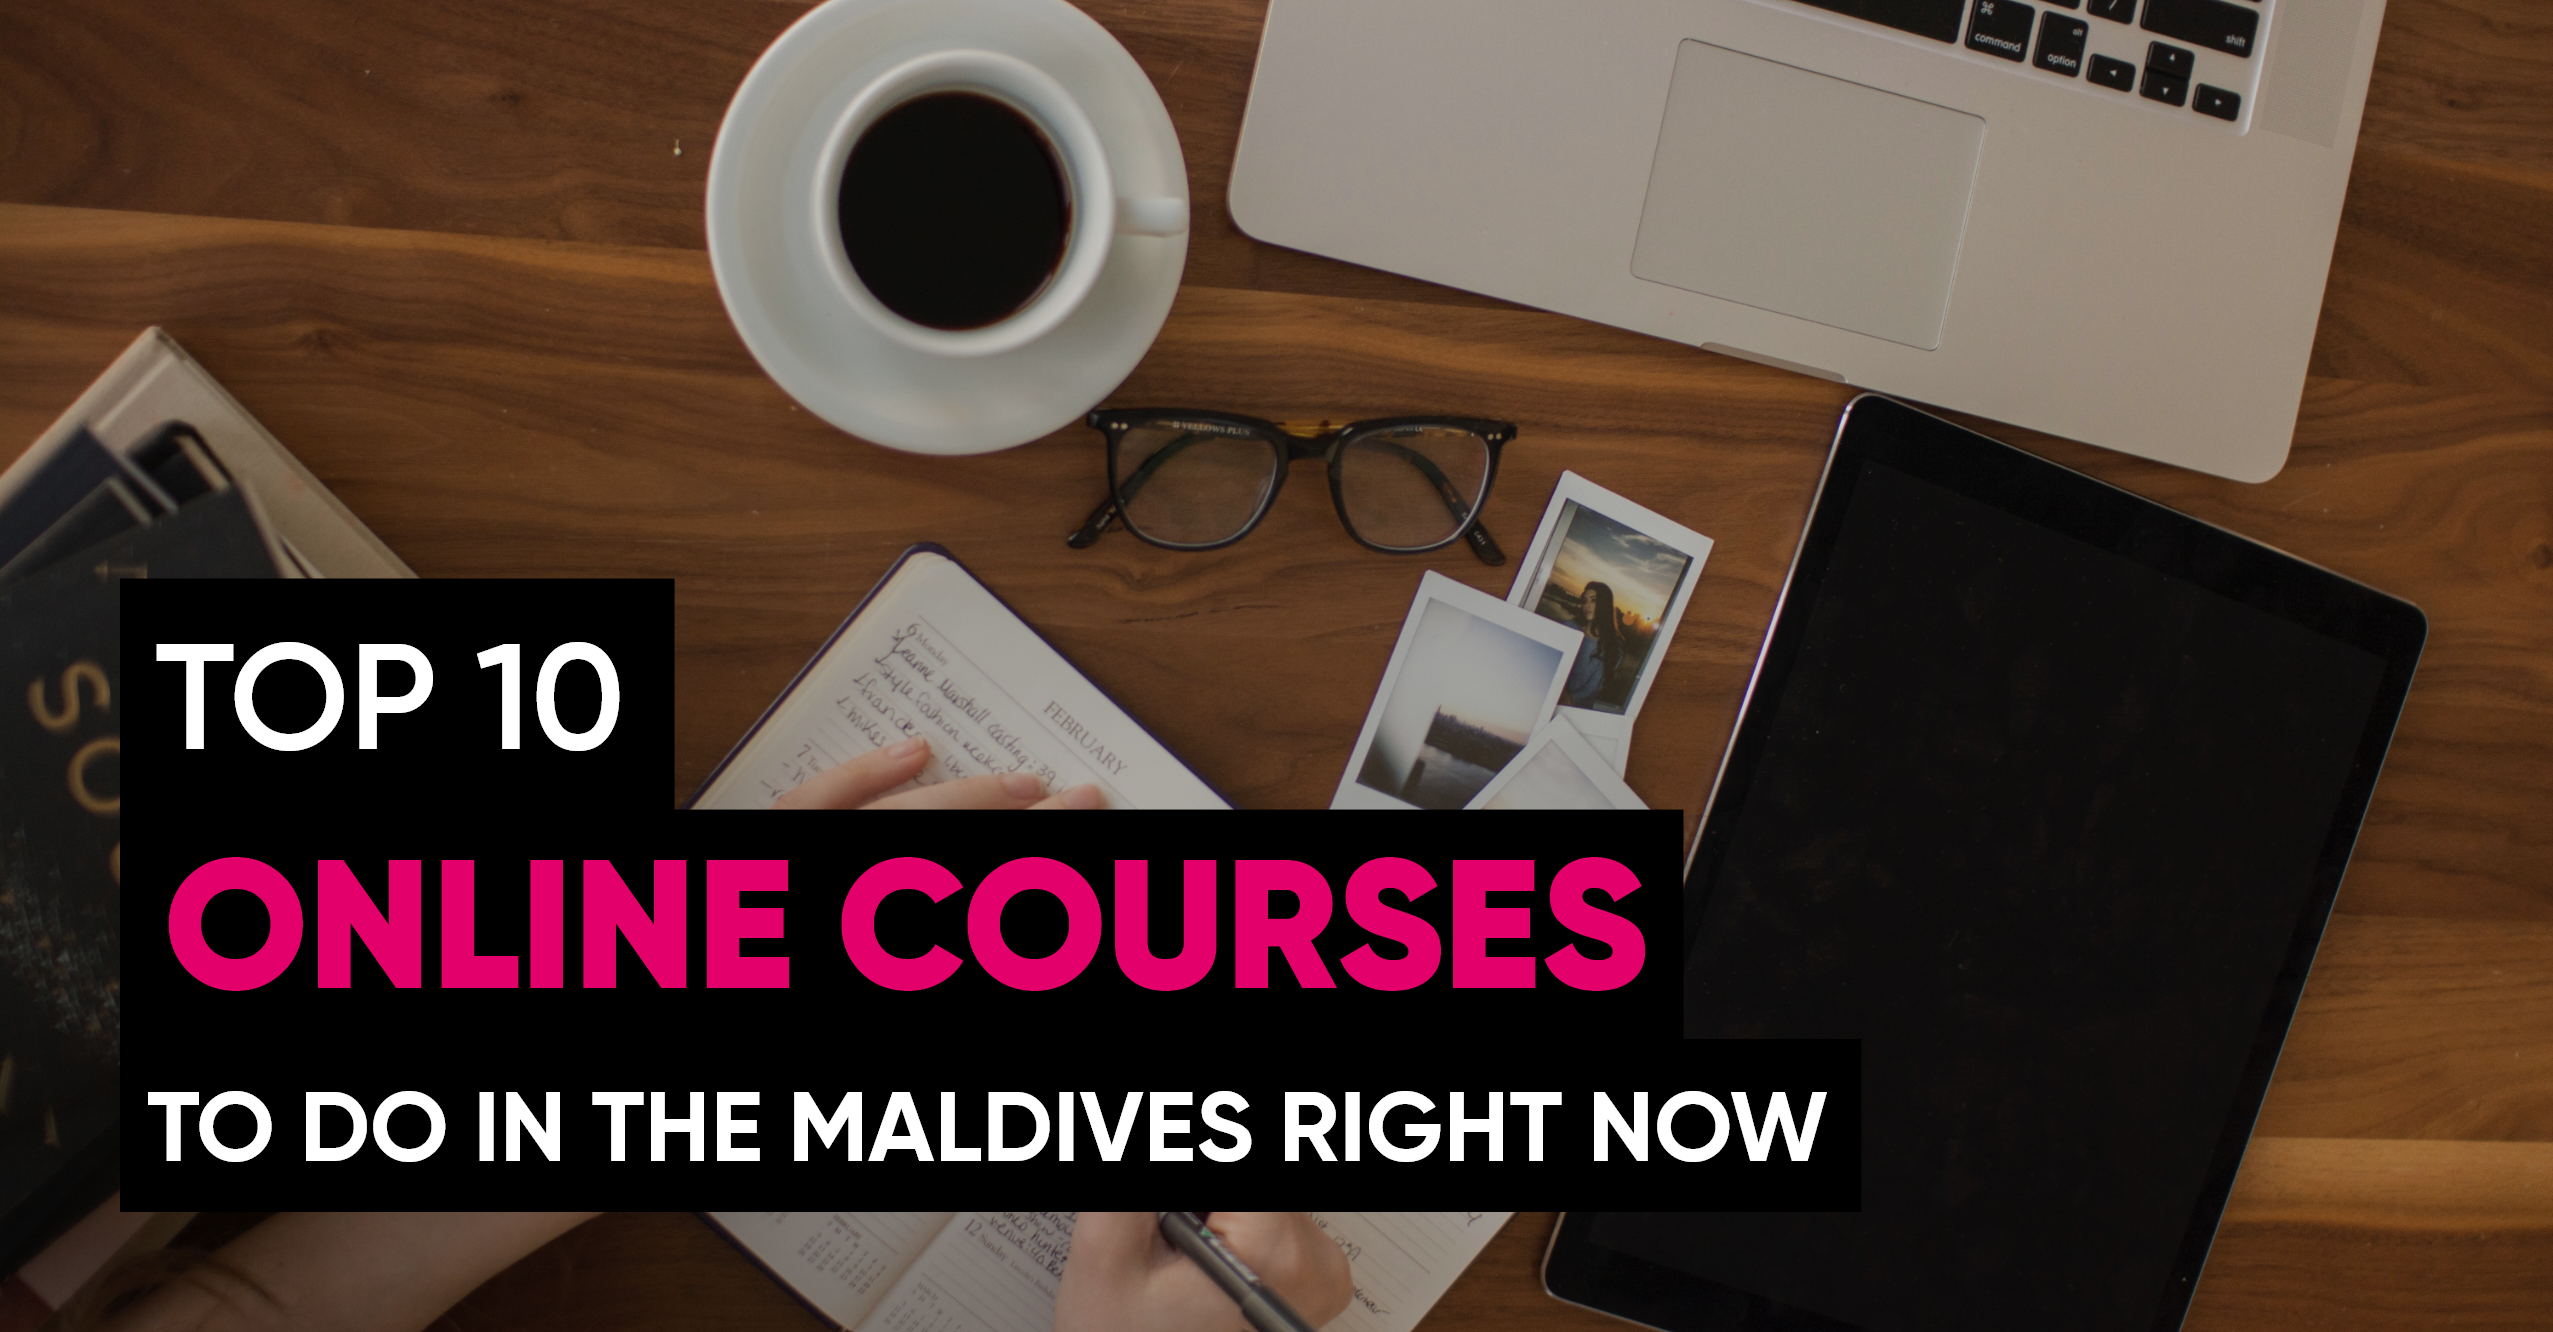 Top 10 Online Courses To Do in the Maldives Right Now